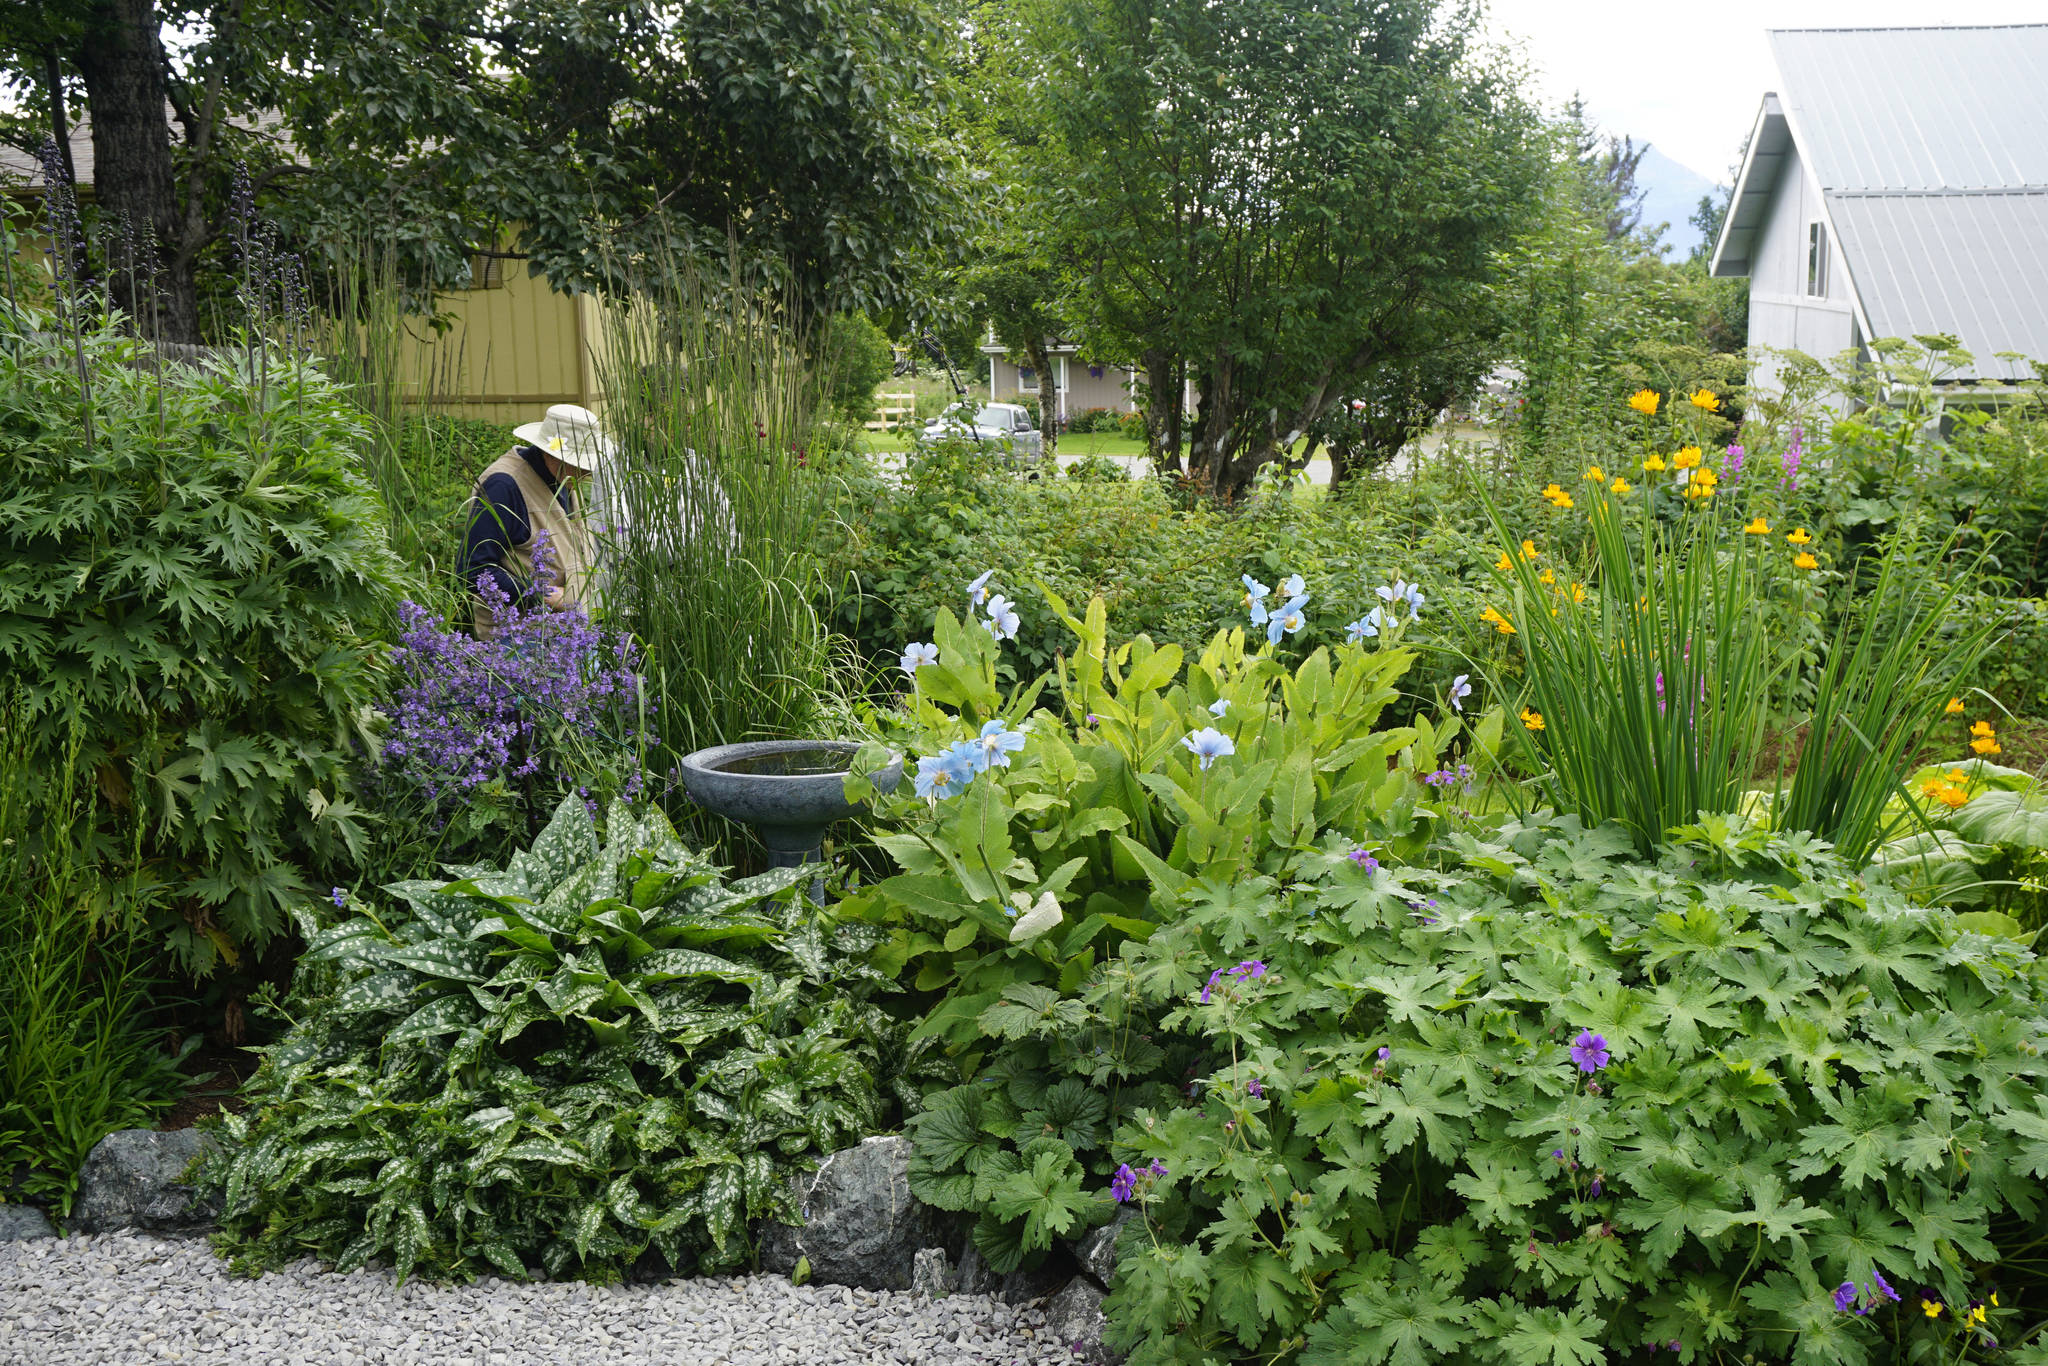 Francie Roberts’ “Everything Garden” includes flower beds, fountains, a vegetable garden and a greenhouse. It was one of five gardens featured in the 2018 Homer Garden Tour. (Photo by Michael Armstrong/Homer News)